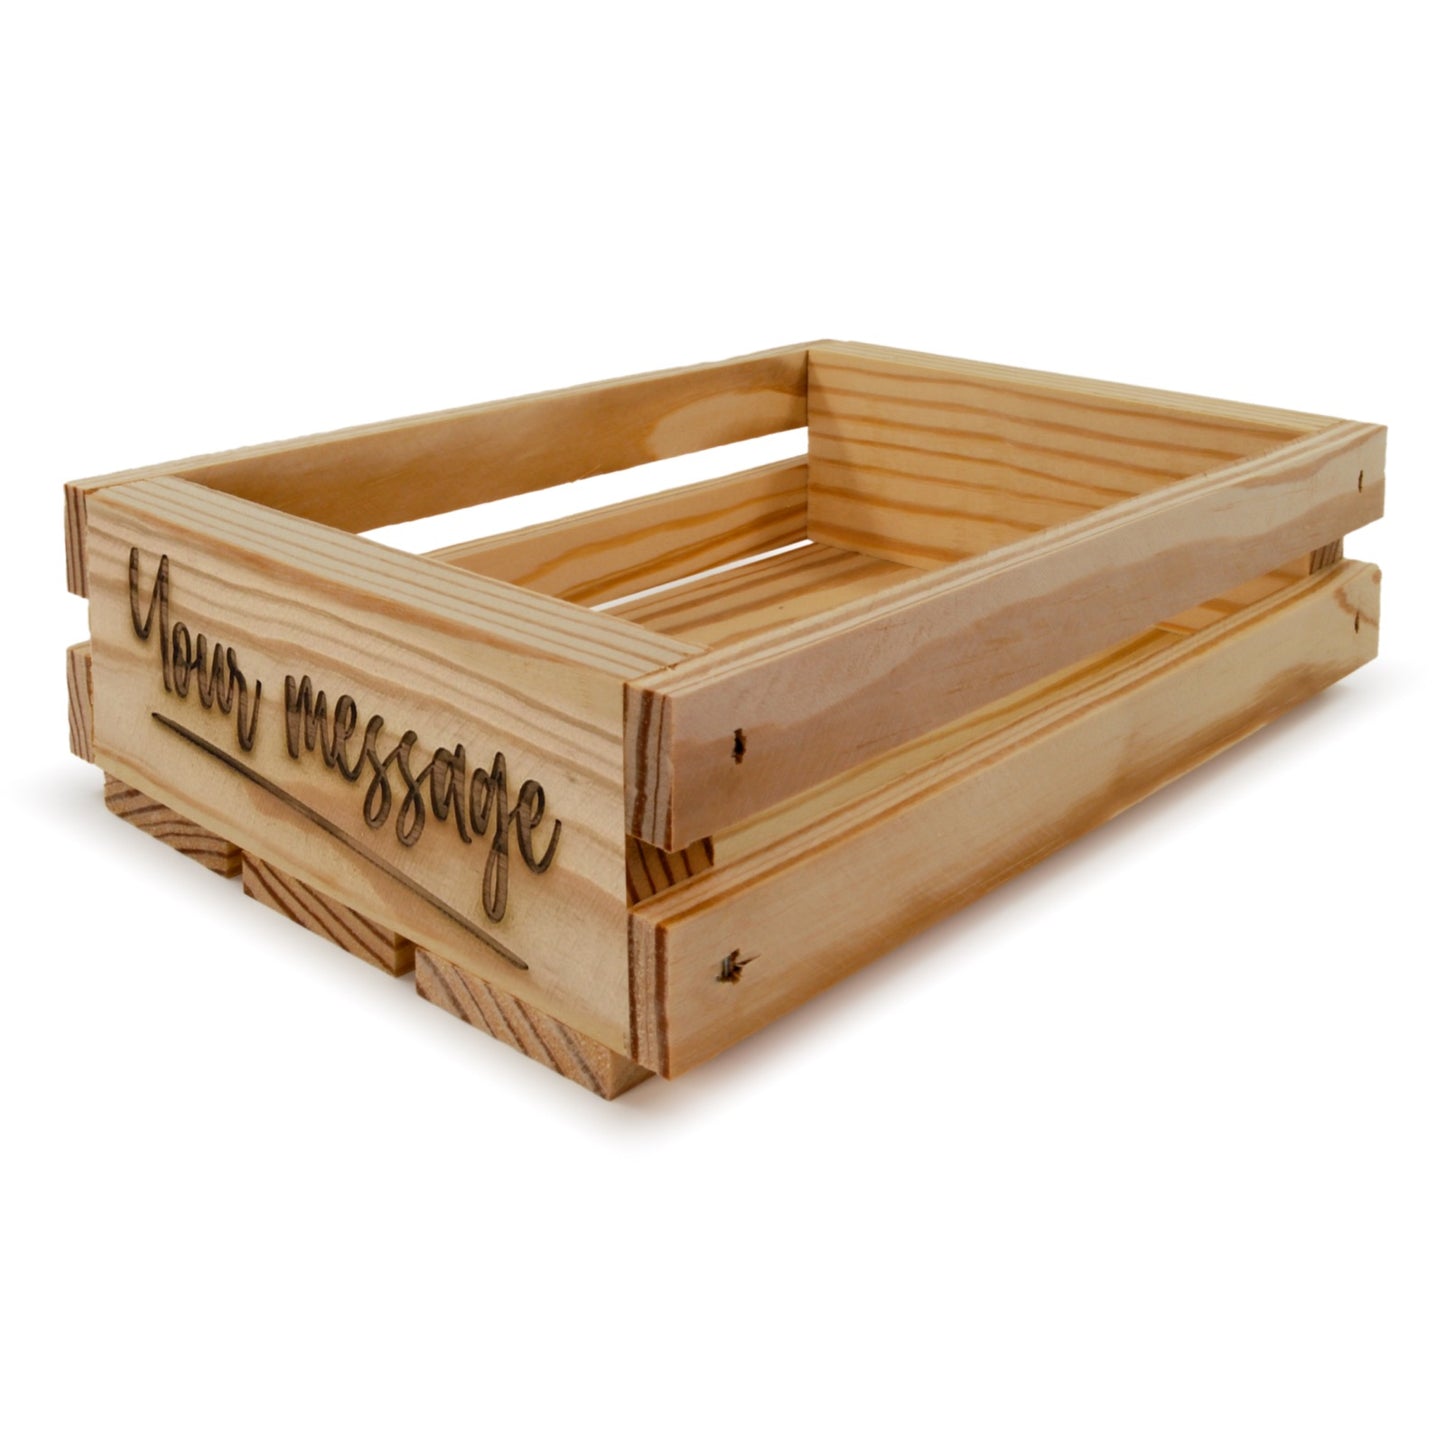 Small wooden crates 8x6x2.5 your message included, 6-SS-8-6-2.5-ST-NW-NL, 12-SS-8-6-2.5-ST-NW-NL, 24-SS-8-6-2.5-ST-NW-NL, 48-SS-8-6-2.5-ST-NW-NL, 96-SS-8-6-2.5-ST-NW-NL